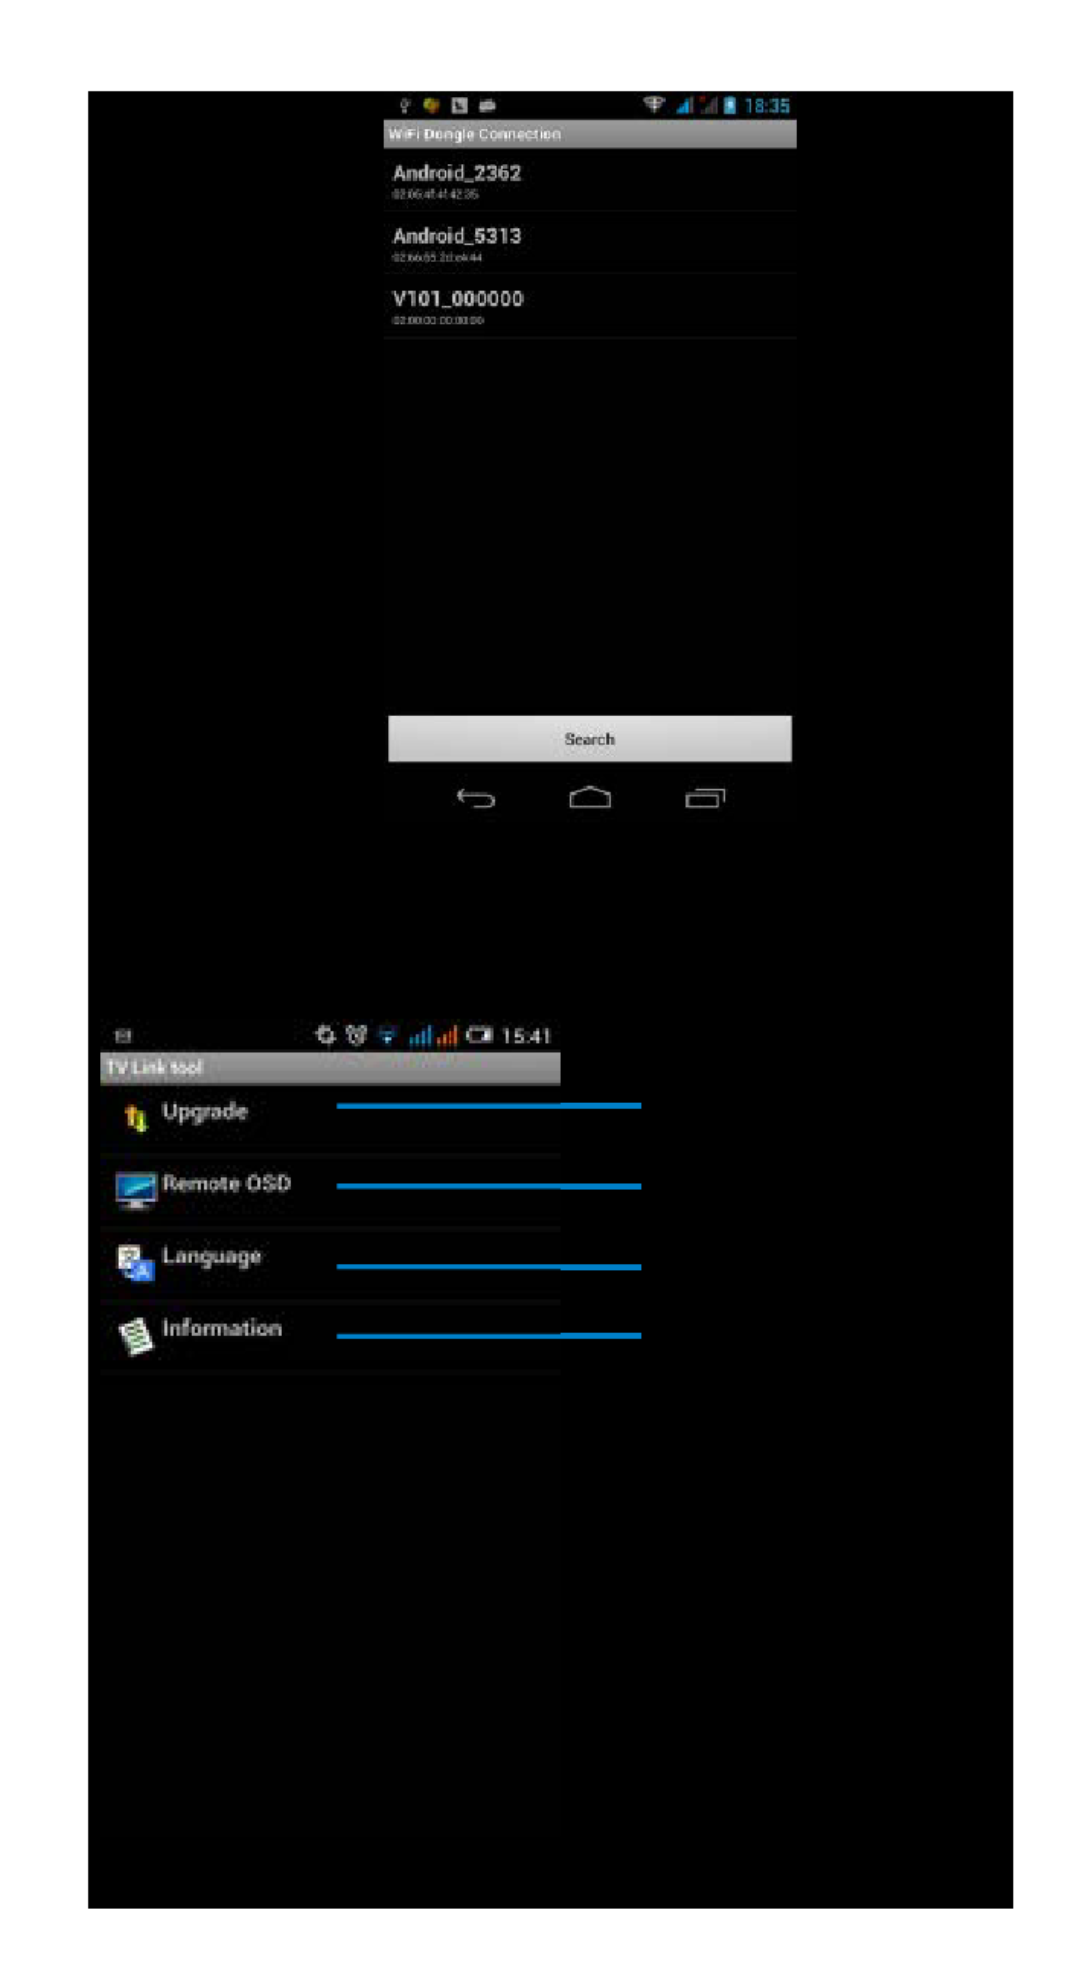 Alcatel Home V101 manual dClick “search” icon, seconds later choose, Touch to upgrade, Touch to see V101’s info 